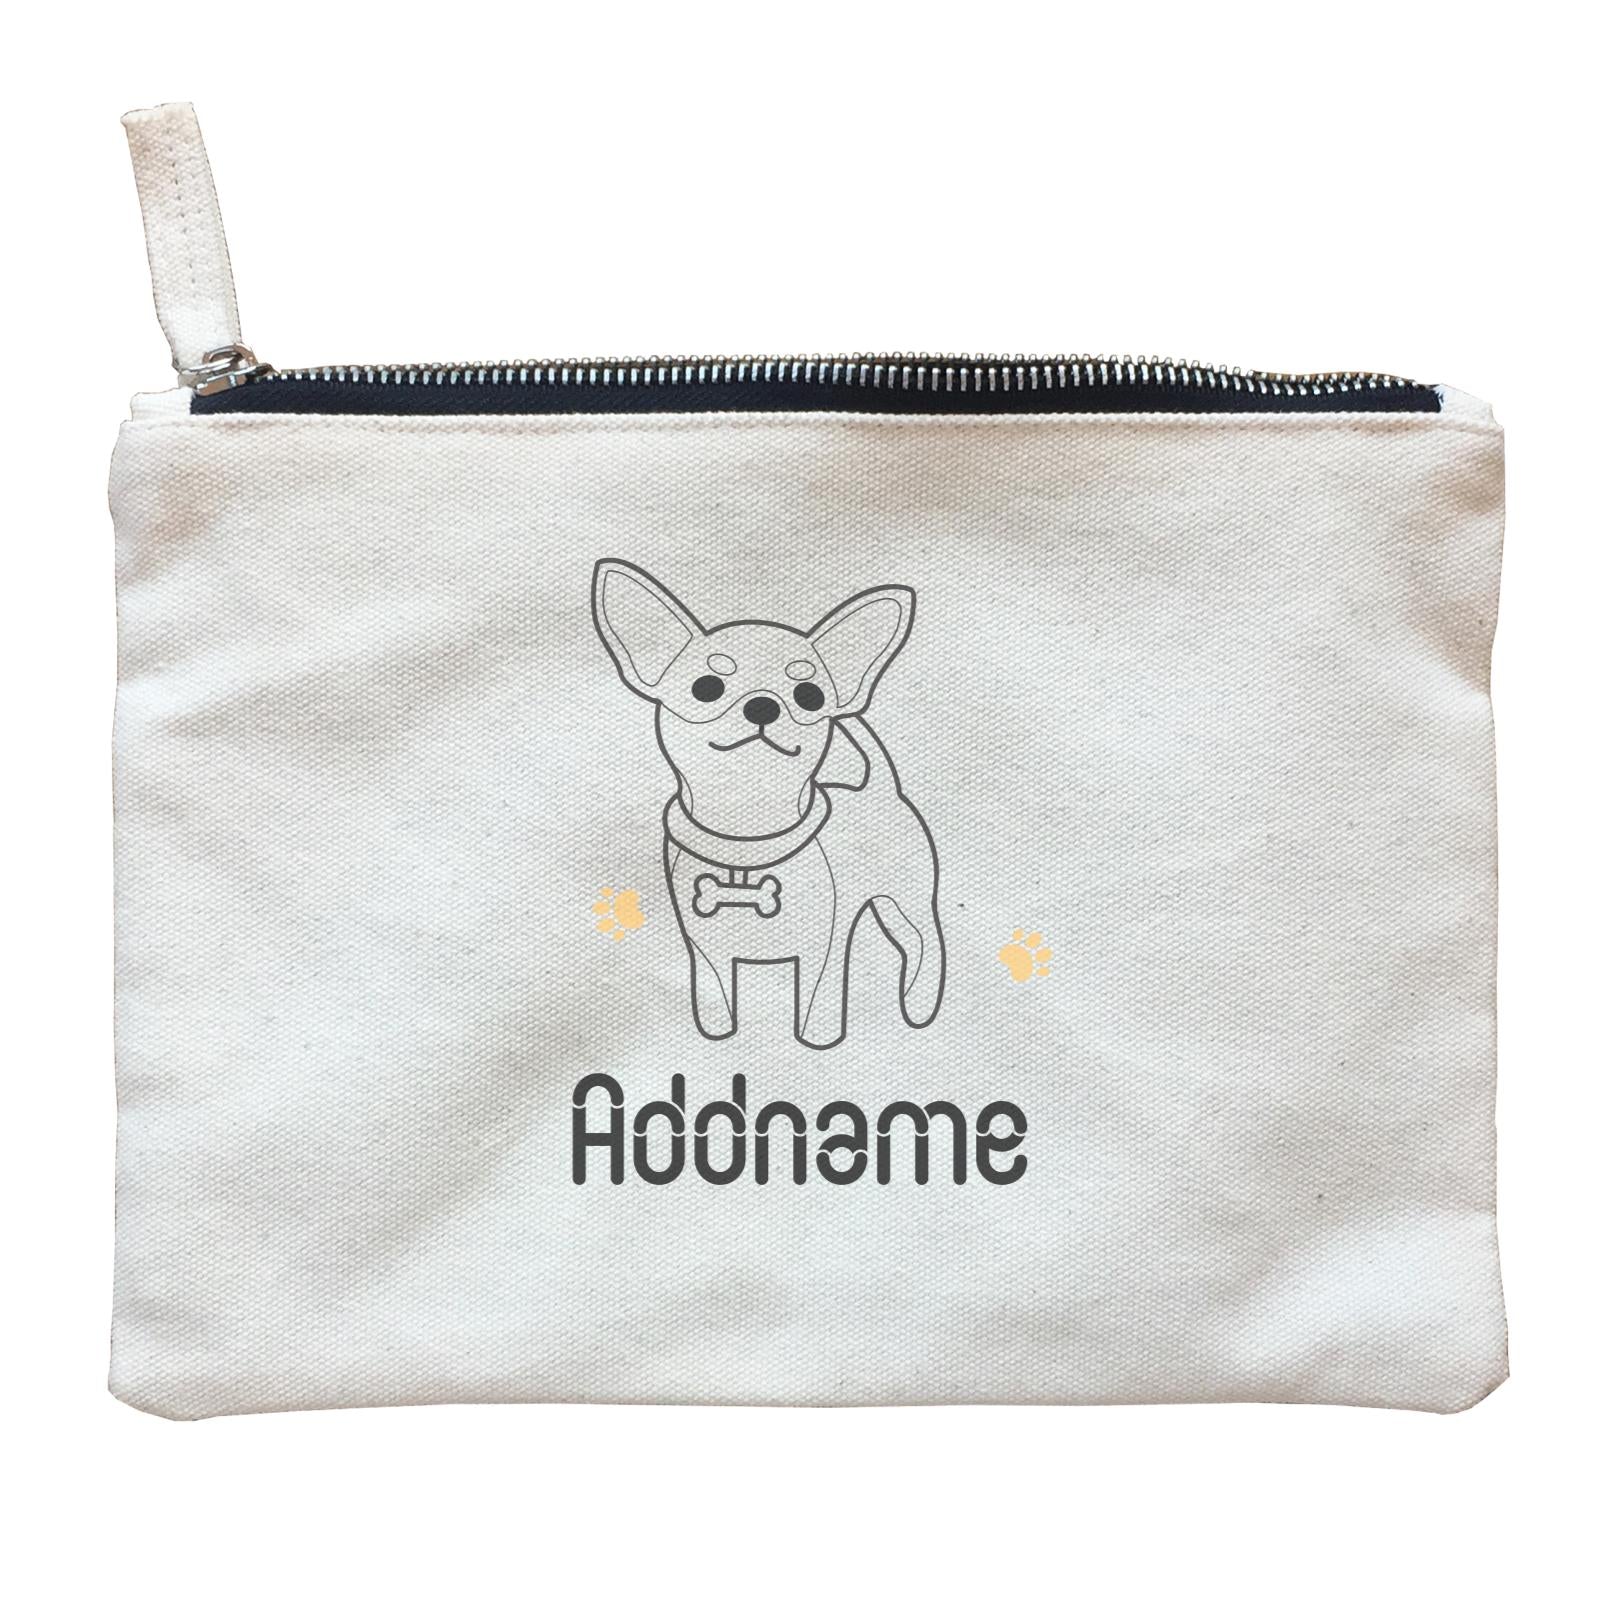 Coloring Outline Cute Hand Drawn Animals Dogs Chihuahua Addname Zipper Pouch